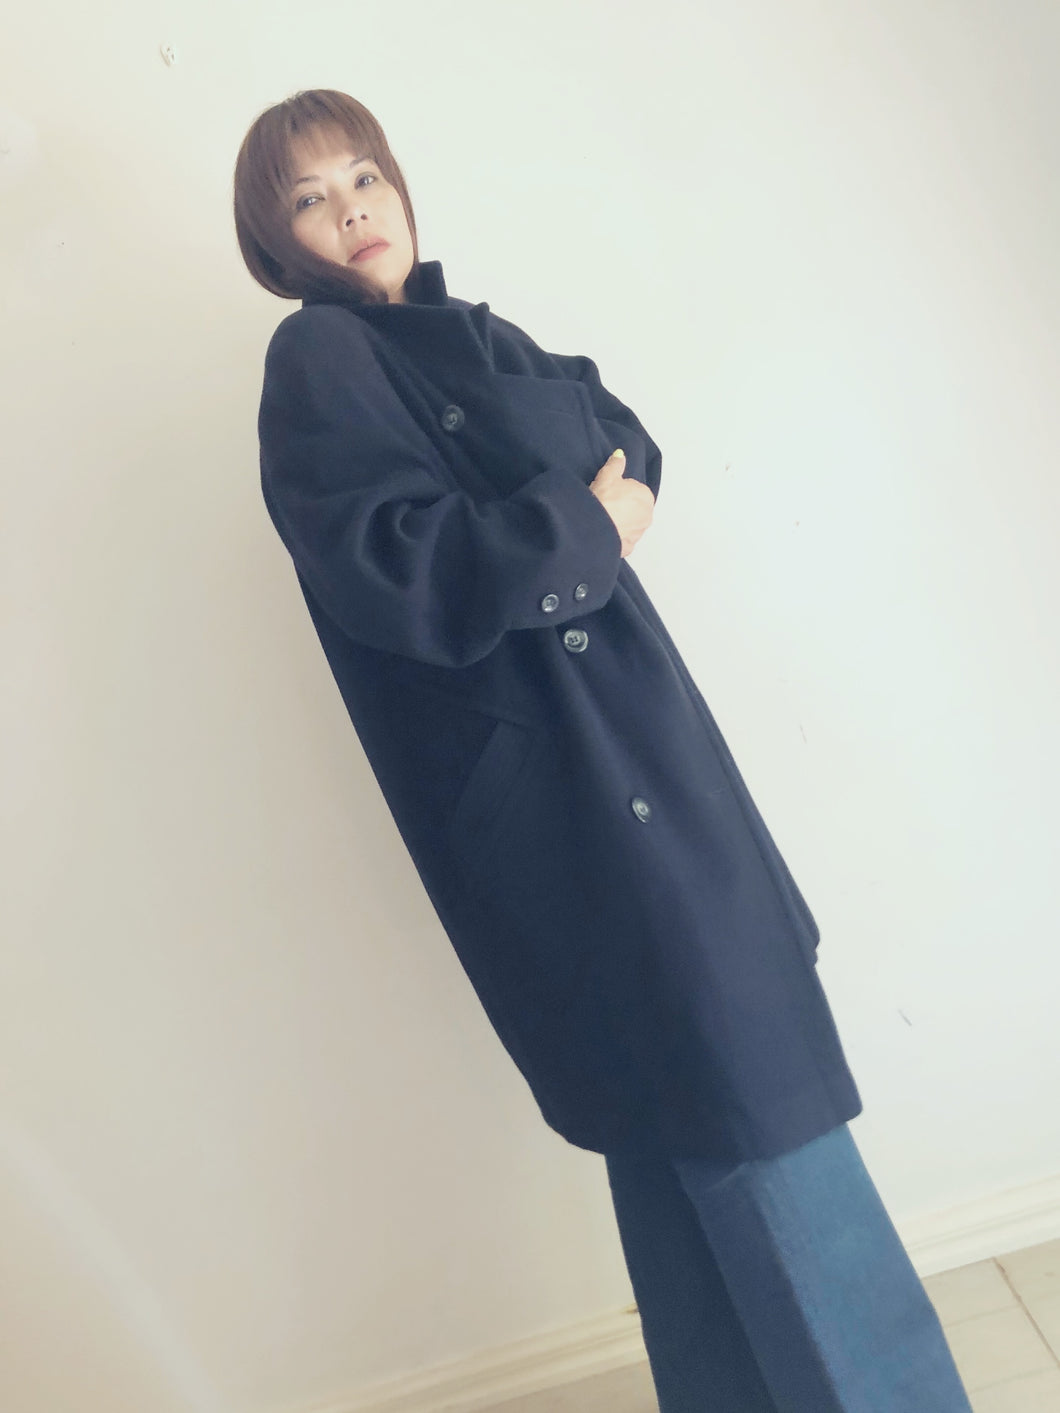 Navy blue lambswool and cashmere coat